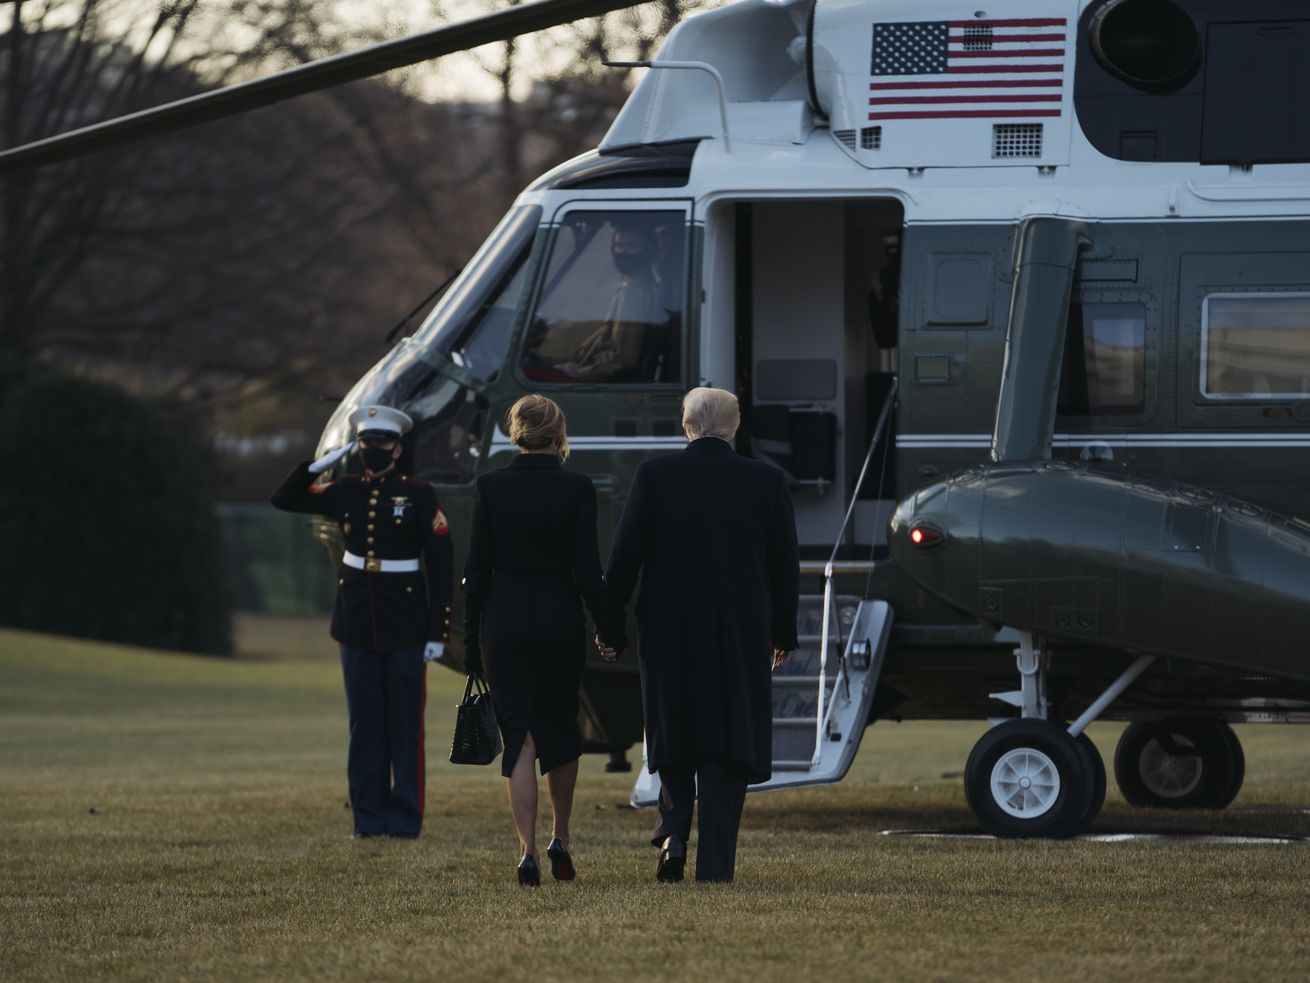 Donald and Melania Trump walk from the White House to the Marine One helicopter.